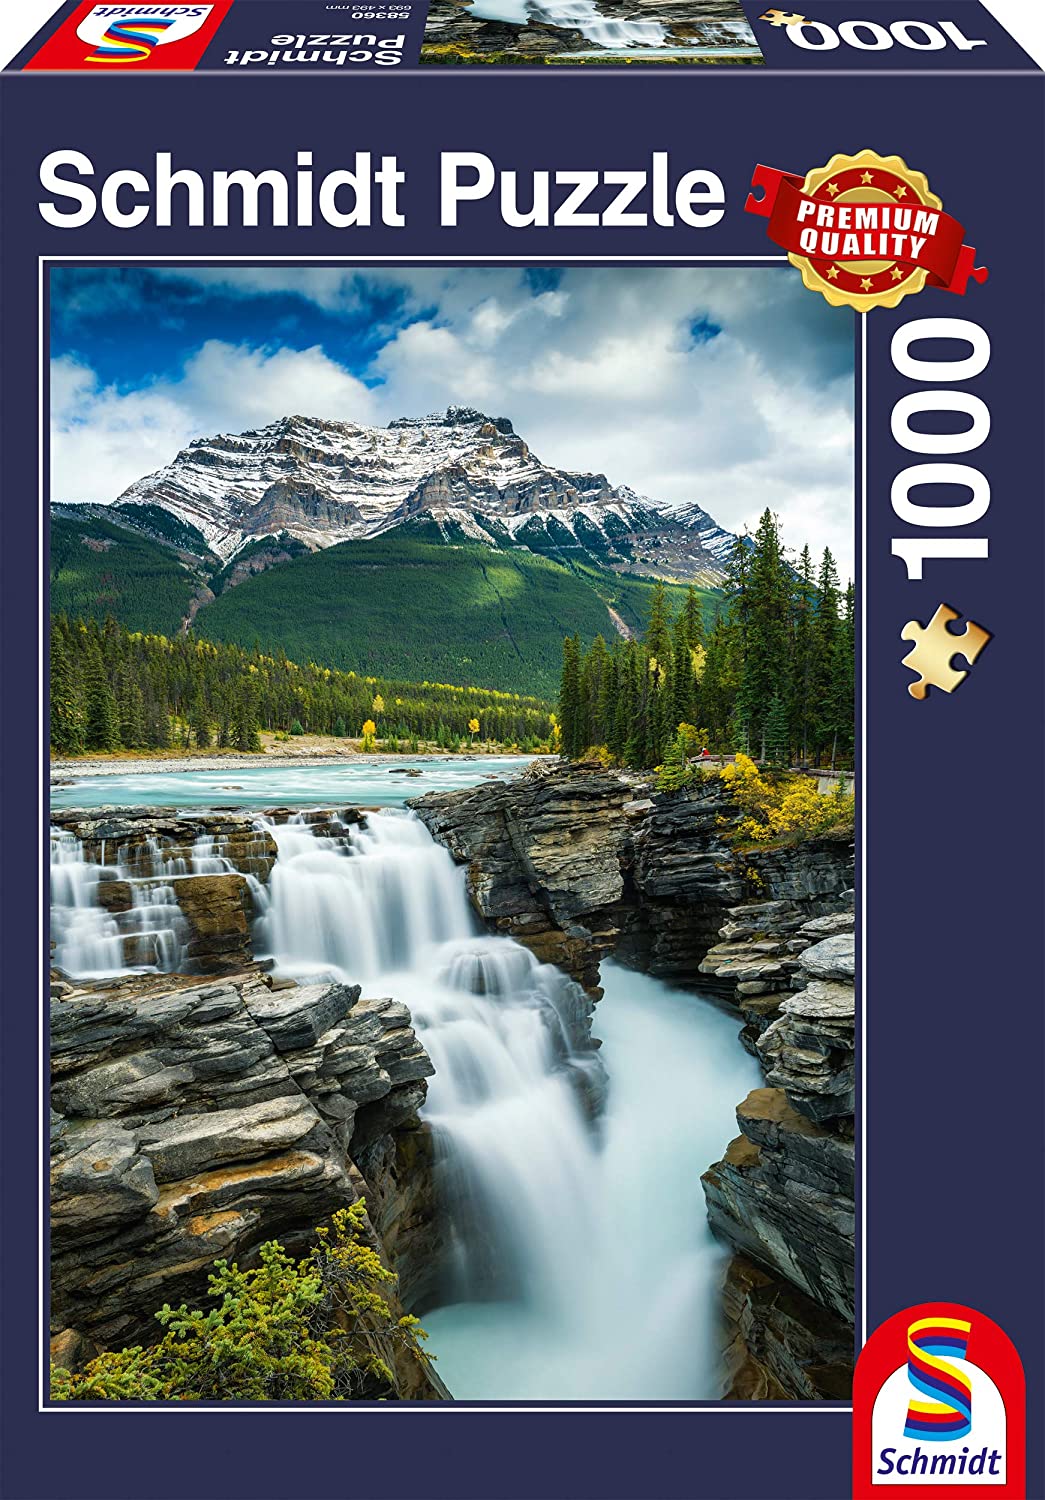 Schmidt Spiele Puzzles (1000): Athabasca Falls, Canada 